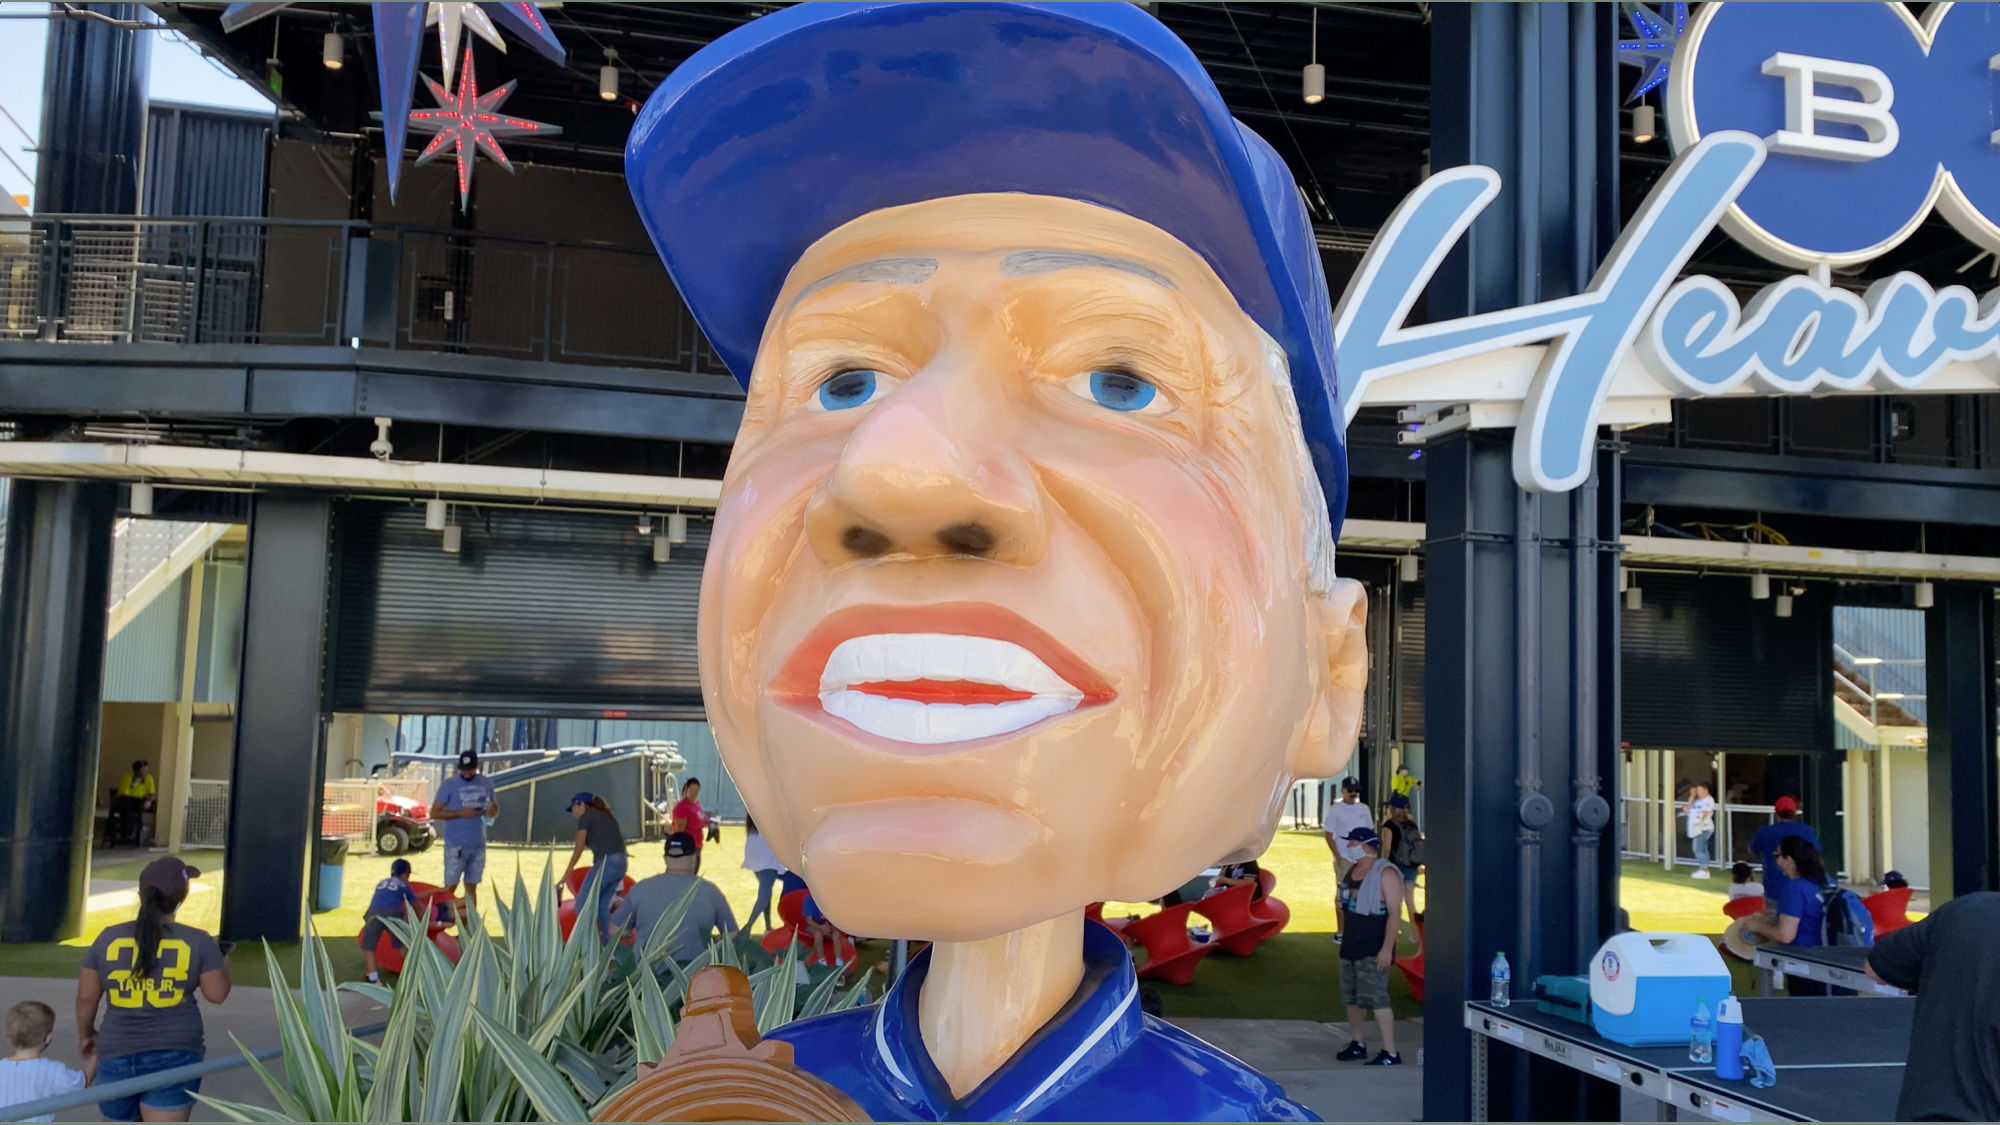 Larger than life Bobbleheads Tommy Lasorda